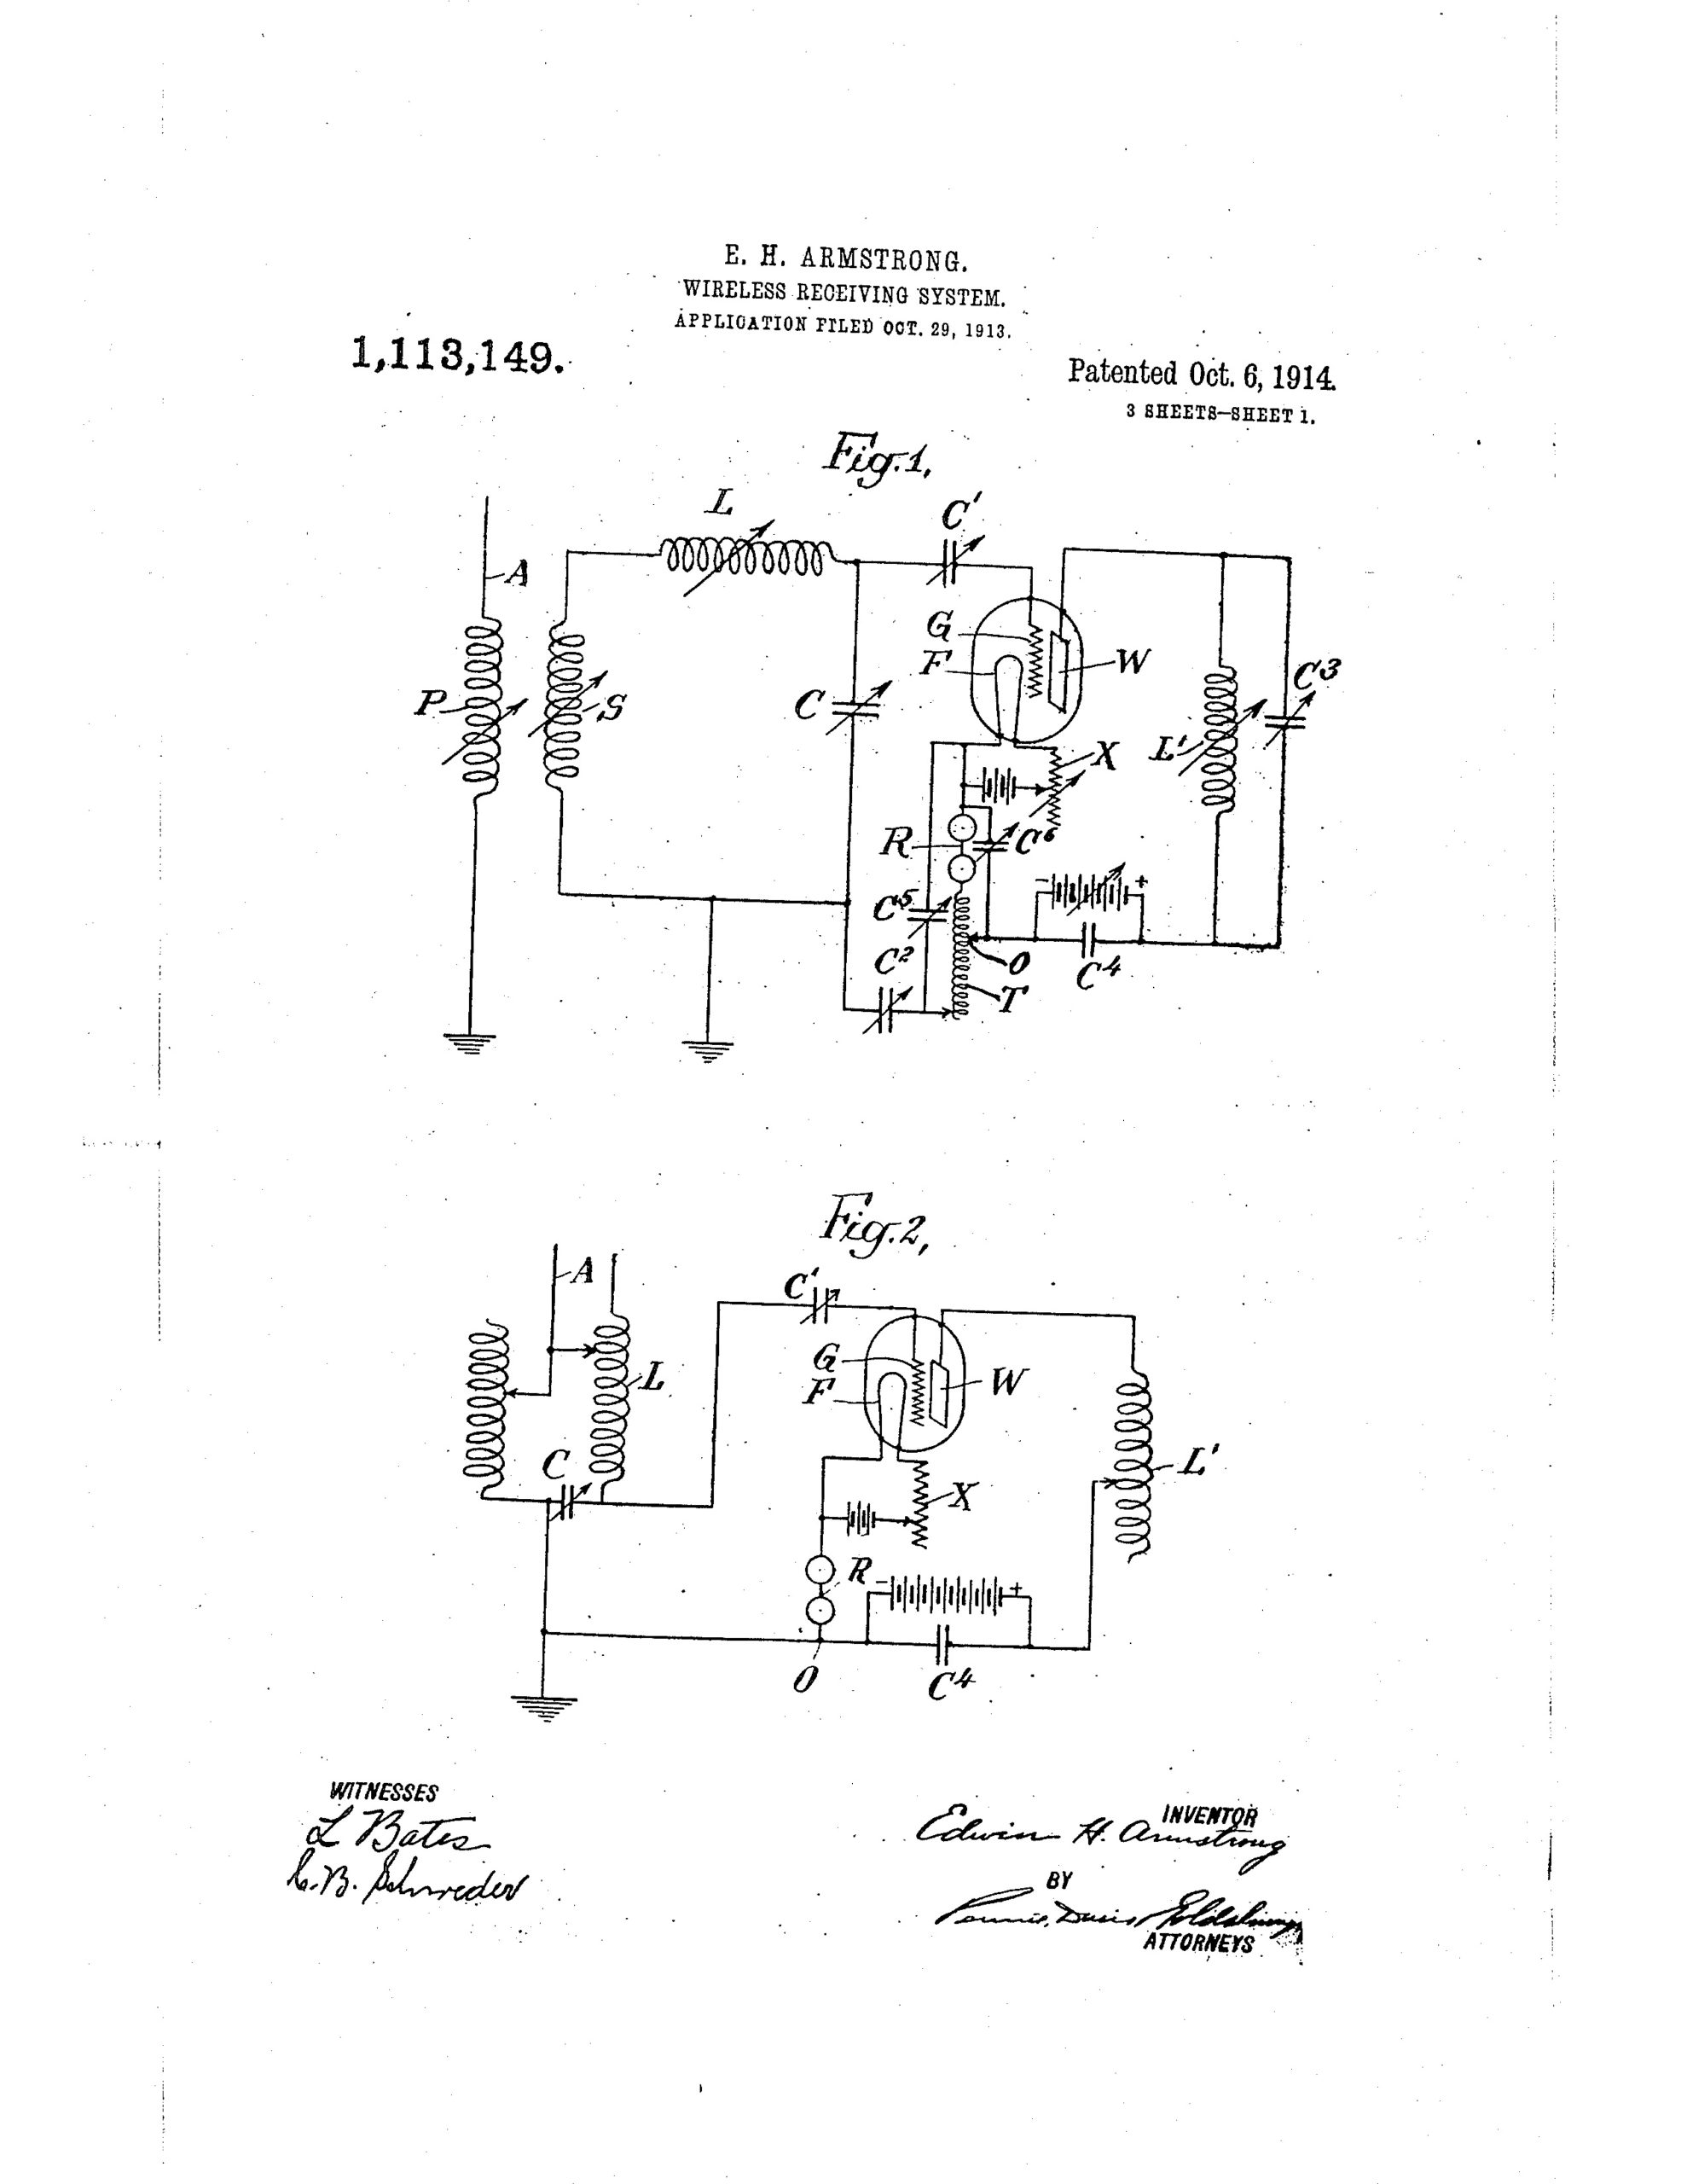 Edwin H. Armstrong, of Yonkers, NY Wireless Receiving System, Patent # 1,113,149. Application Filed Oct. 29, 1913 – Patented Oct. 6, 1914